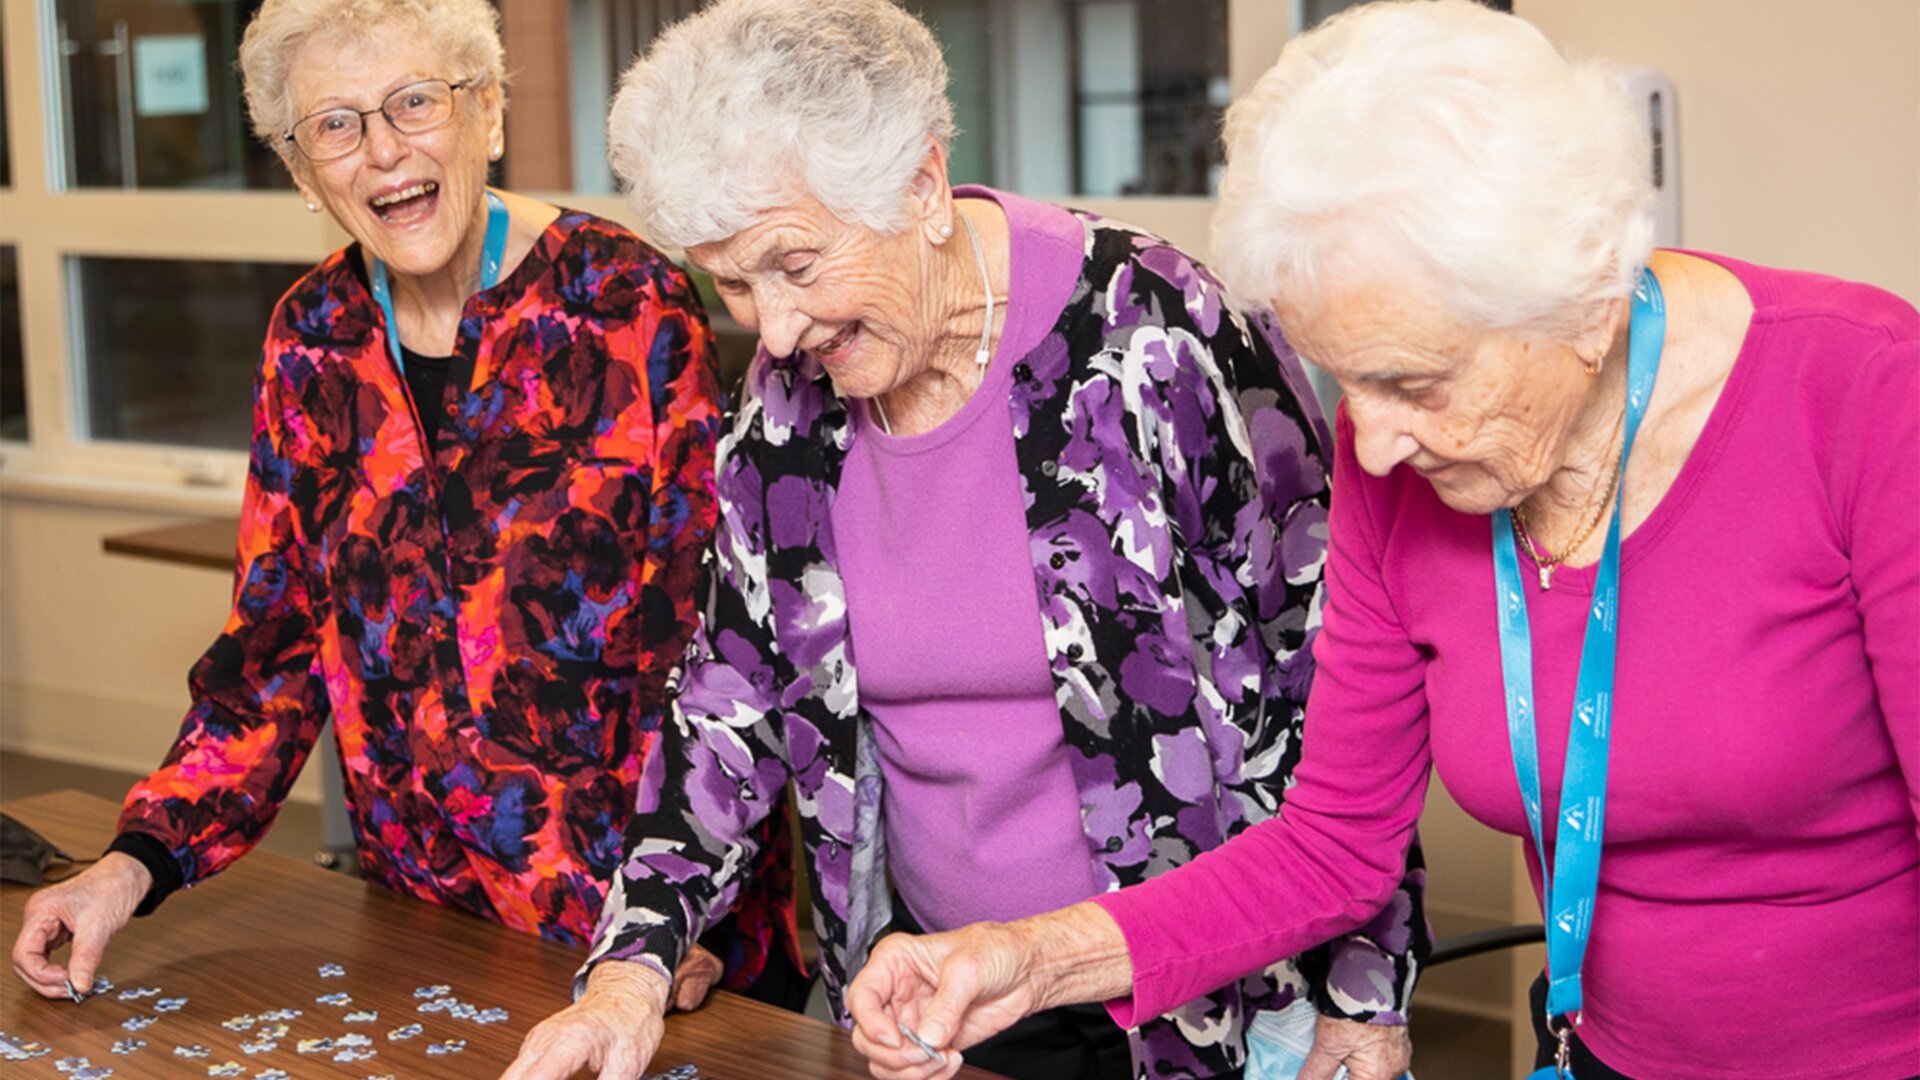 Three women do a puzzle, a fun hobby for elderly